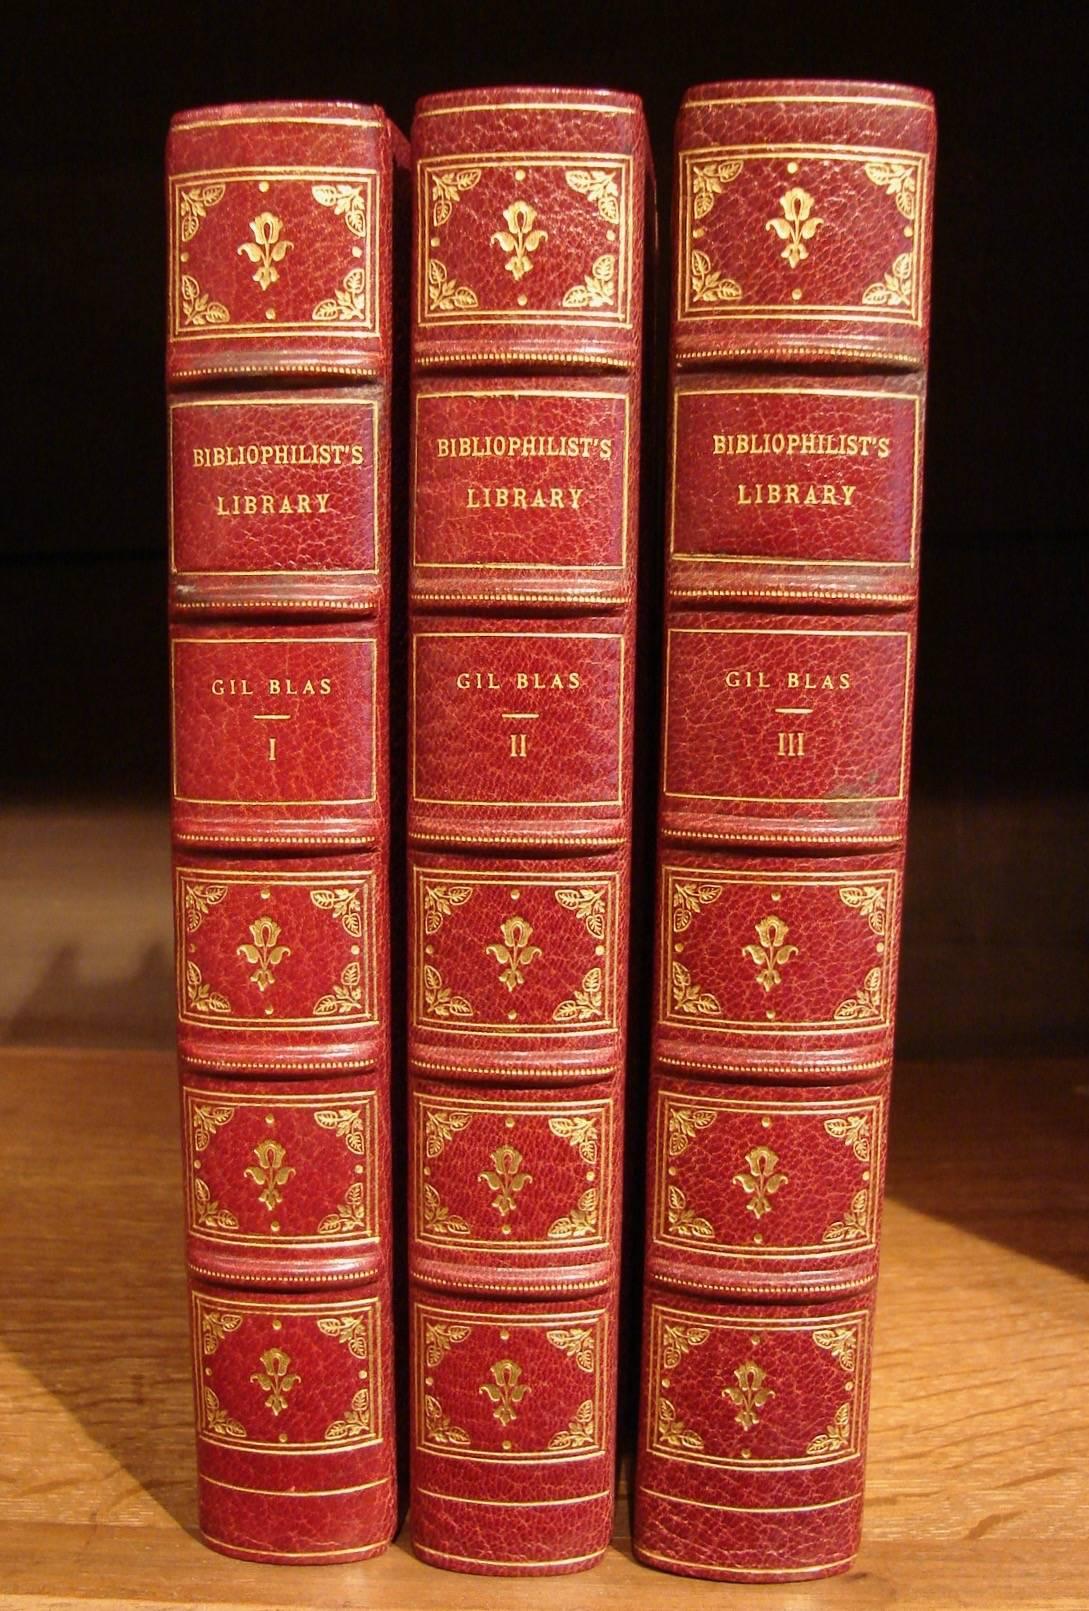 A beautiful set of 20 volumes titled The Bibliophilist's Library Second Series bound in 3/4 crushed red morocco leather containing various famous works of literature of the 18th and 19th centuries. Published on Japanese vellum paper by George